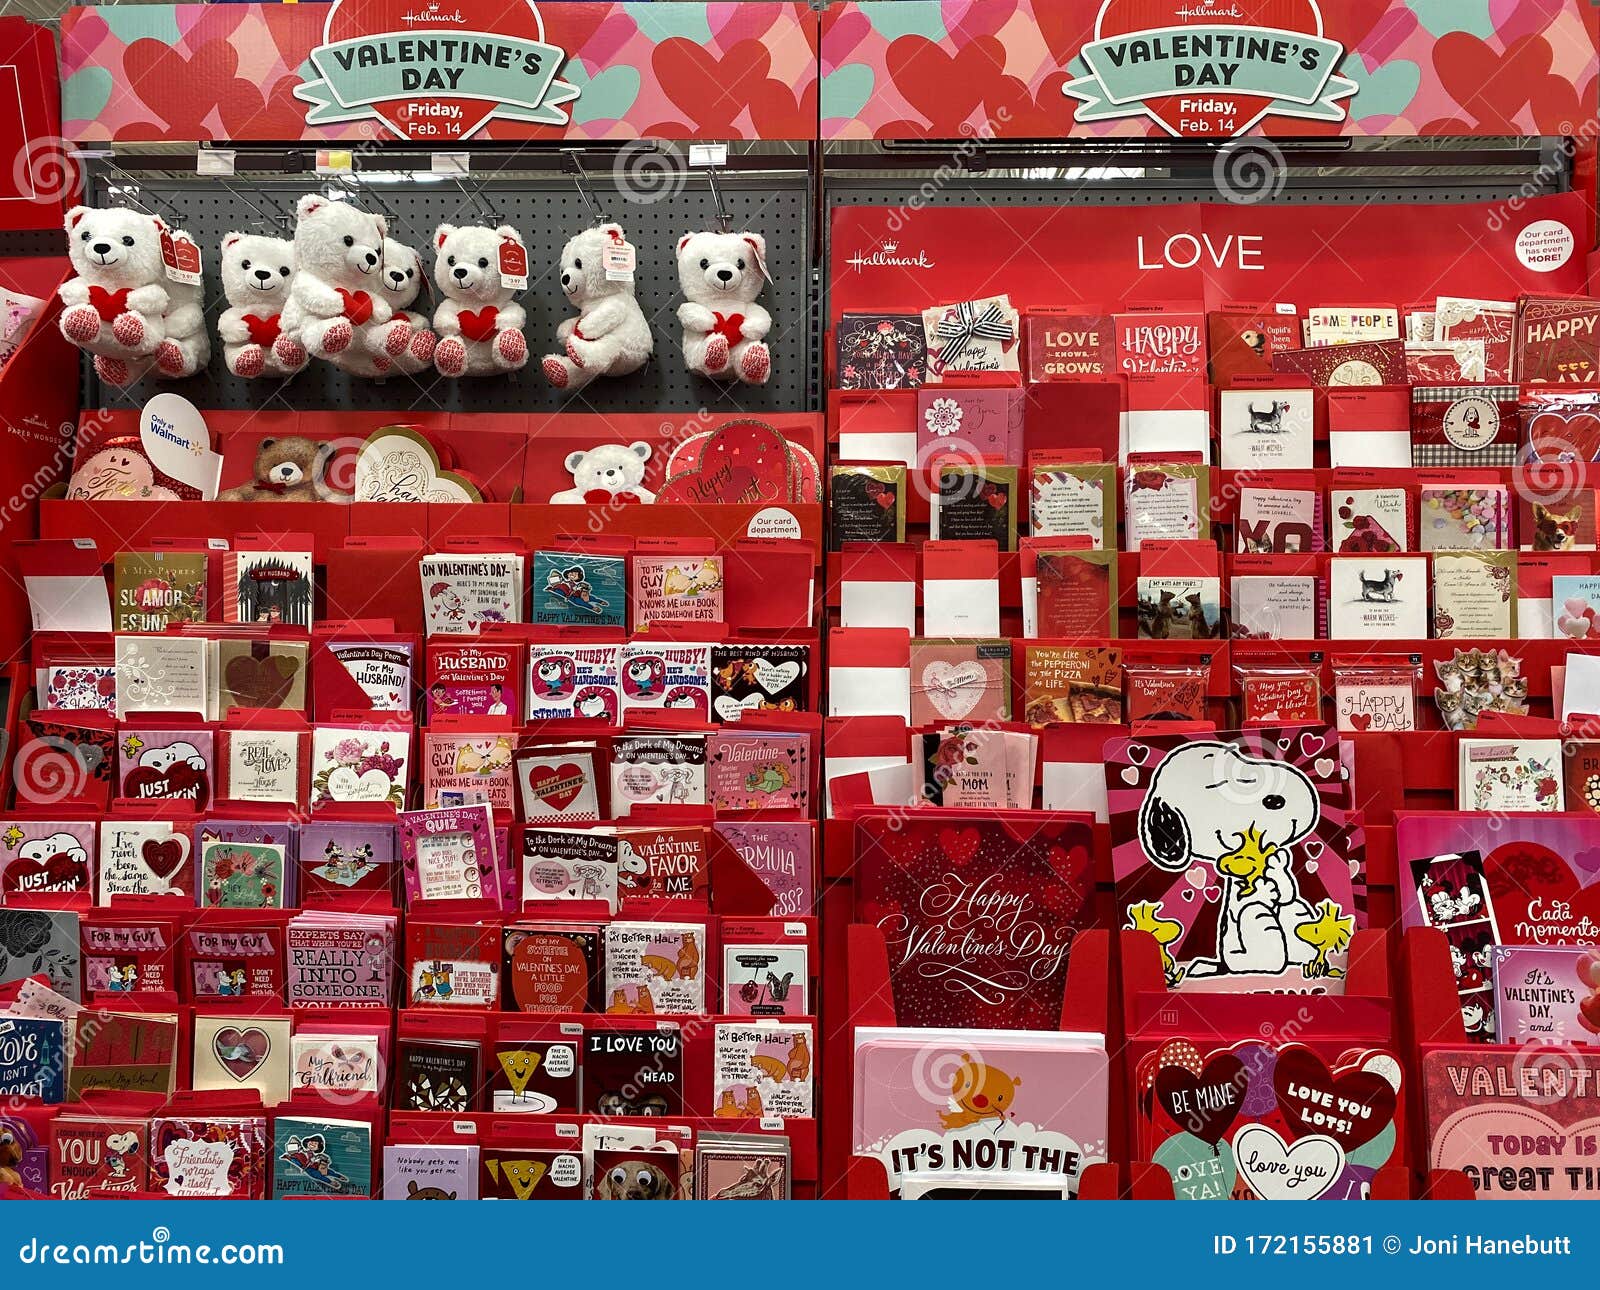 A Valentines Display at Walmart of Cards and Stuffed Bears with Hearts